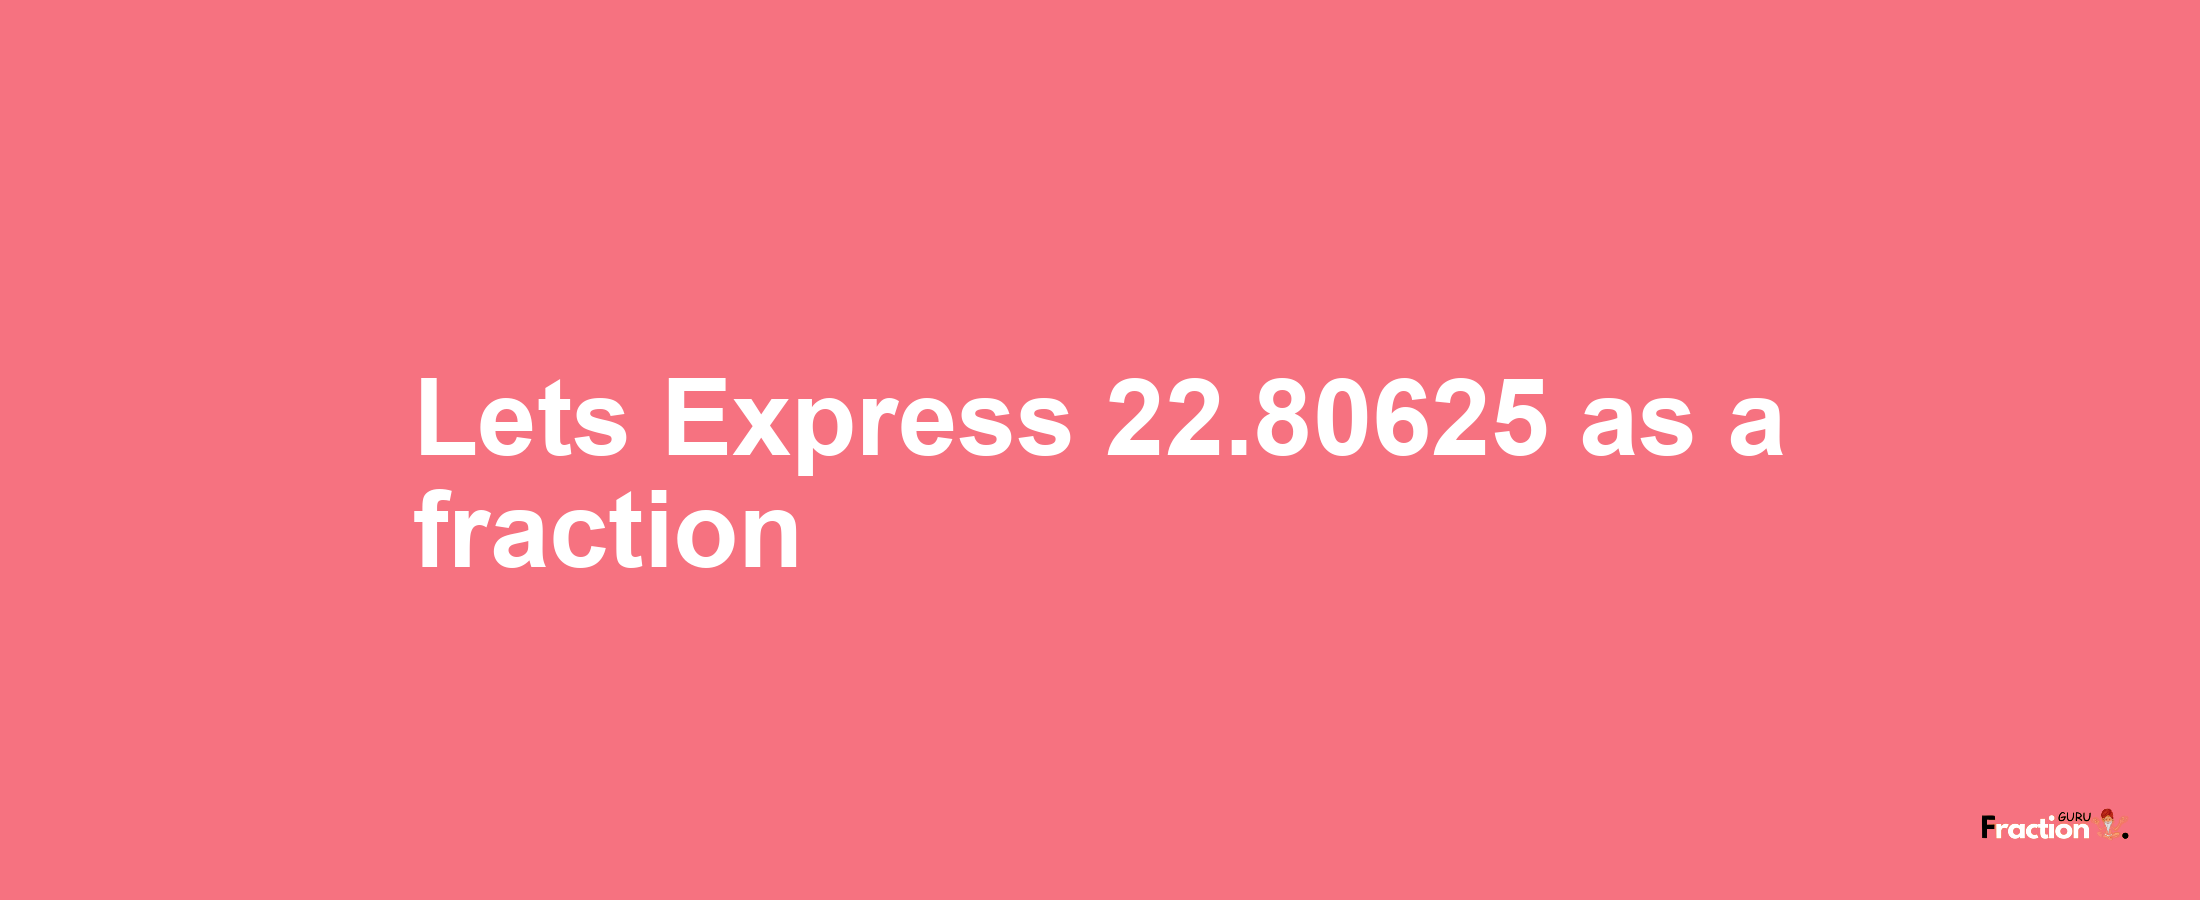 Lets Express 22.80625 as afraction